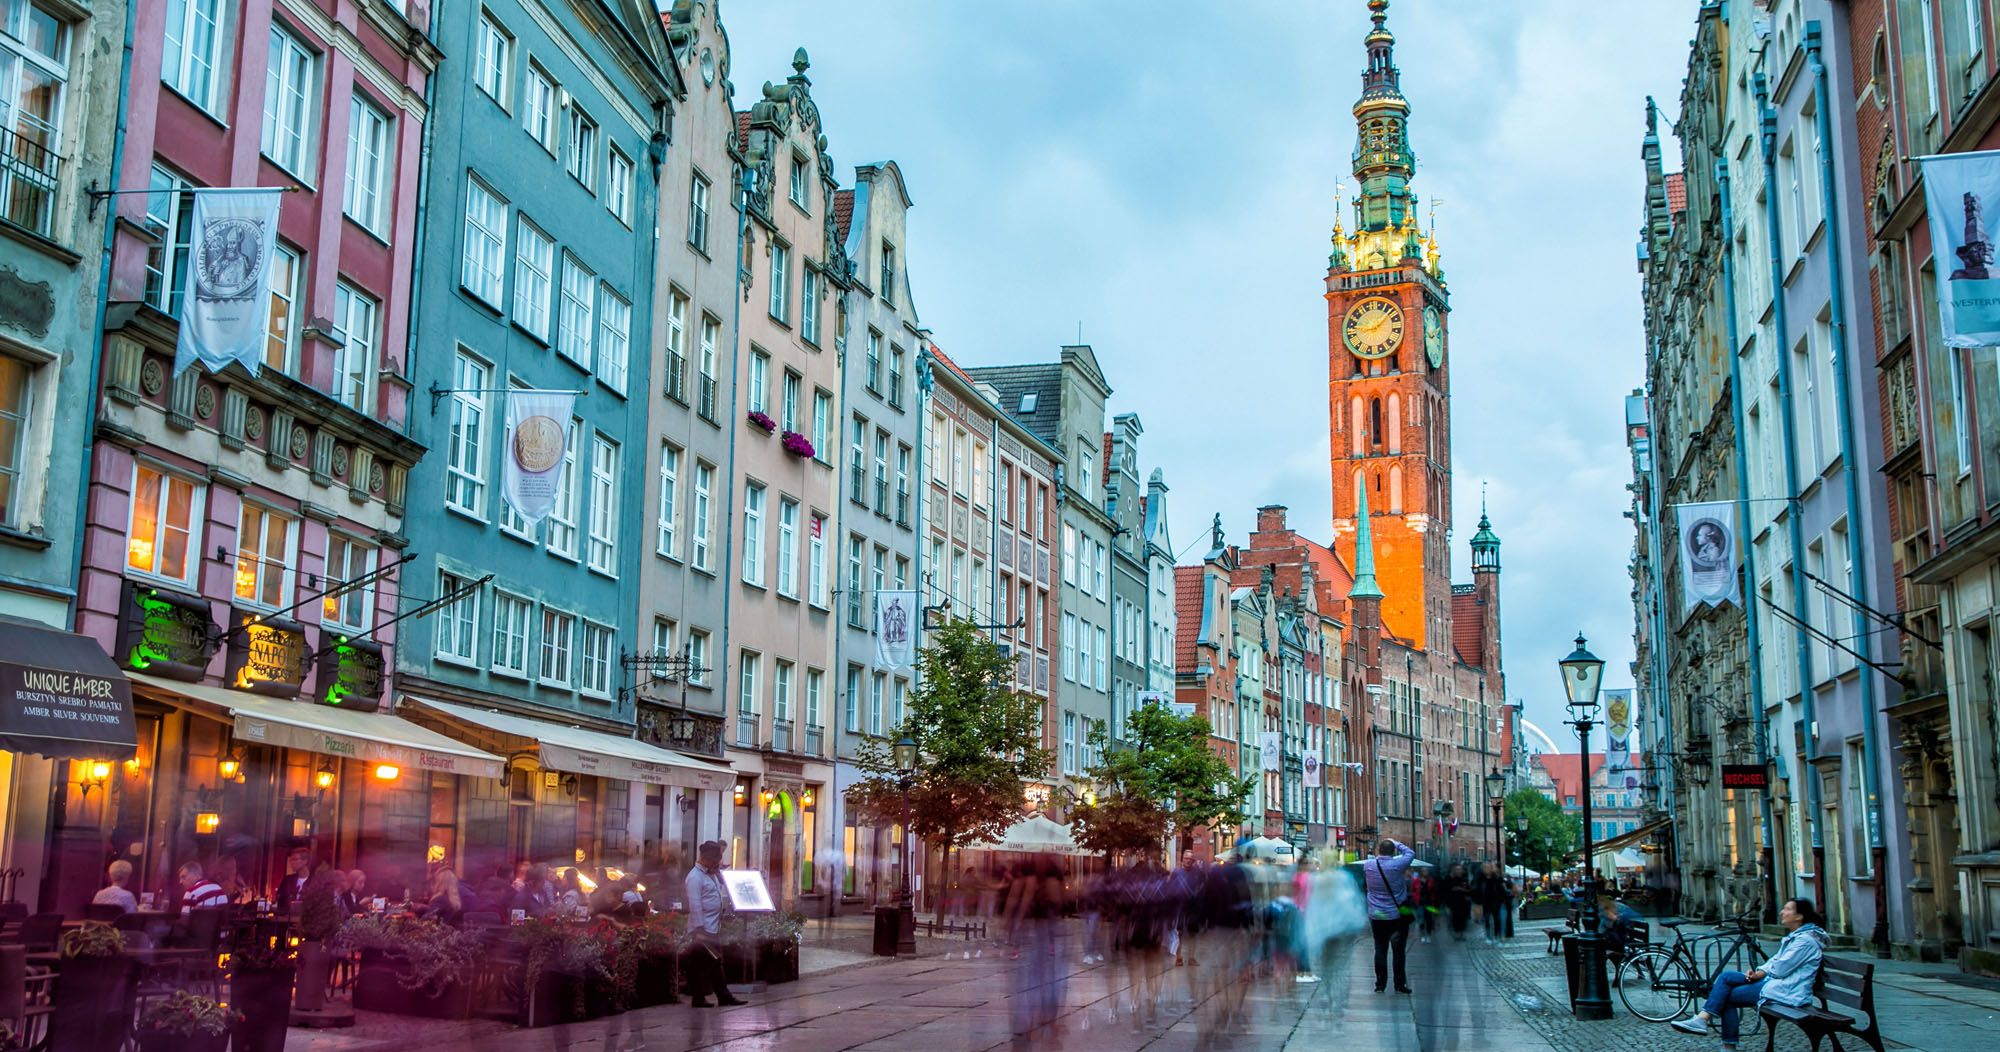 Featured image for “2 Days in Gdansk, Poland: 3 Recommended Itineraries”